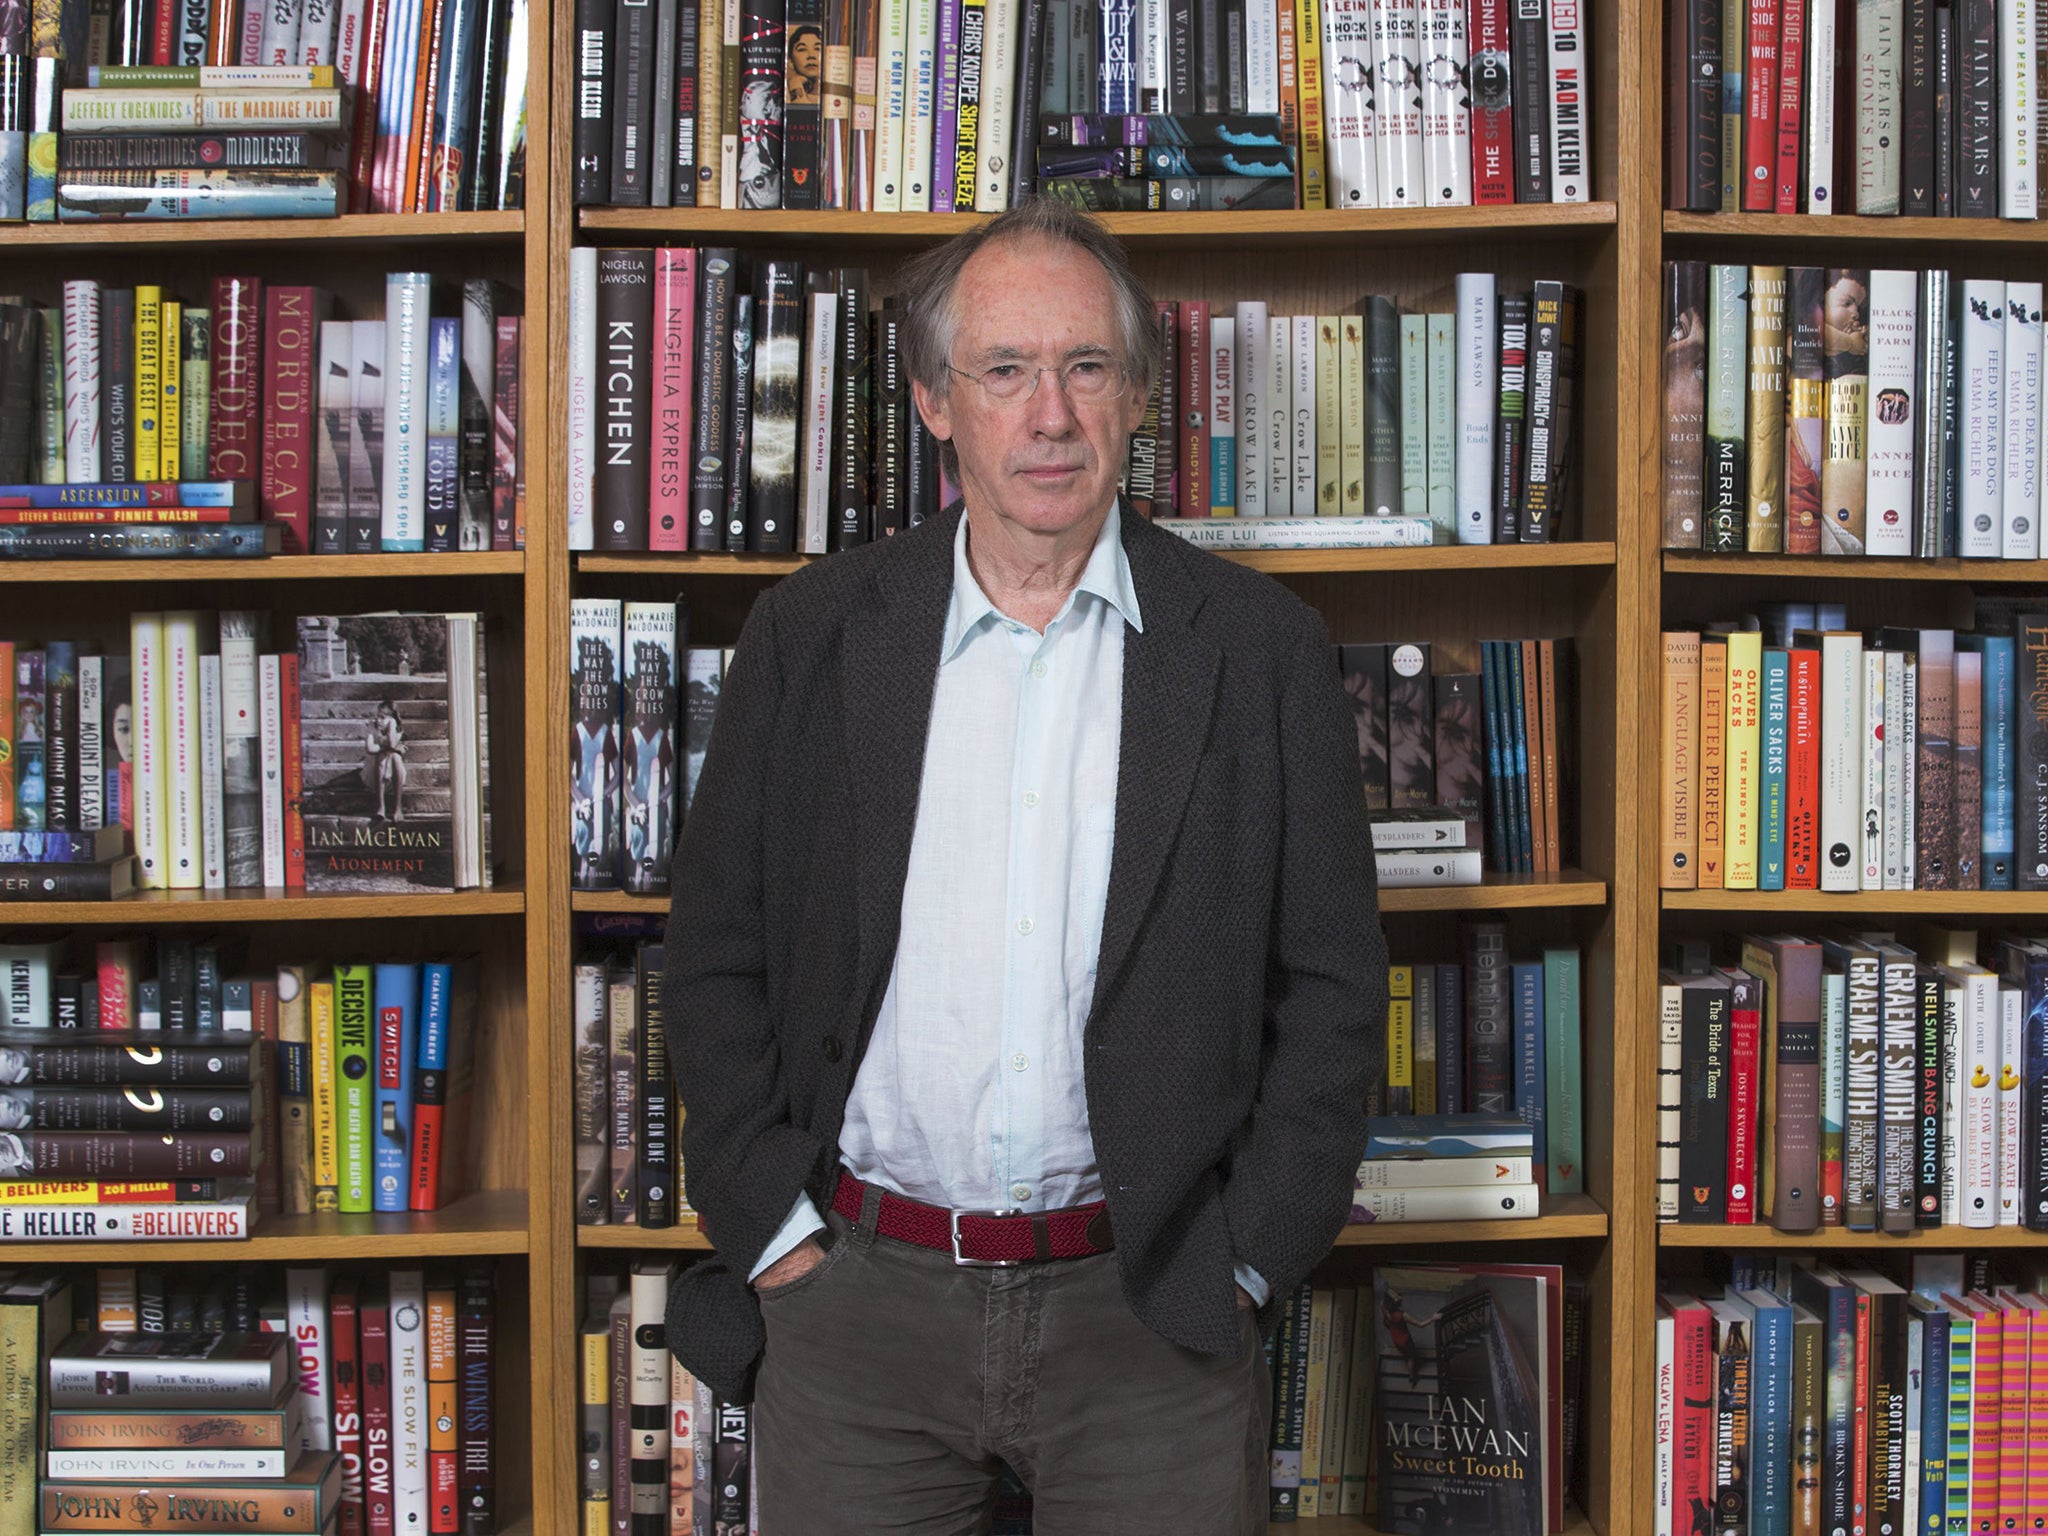 Ian McEwan was Booker-shortlisted in 2007 for the very slim On Chesil Beach